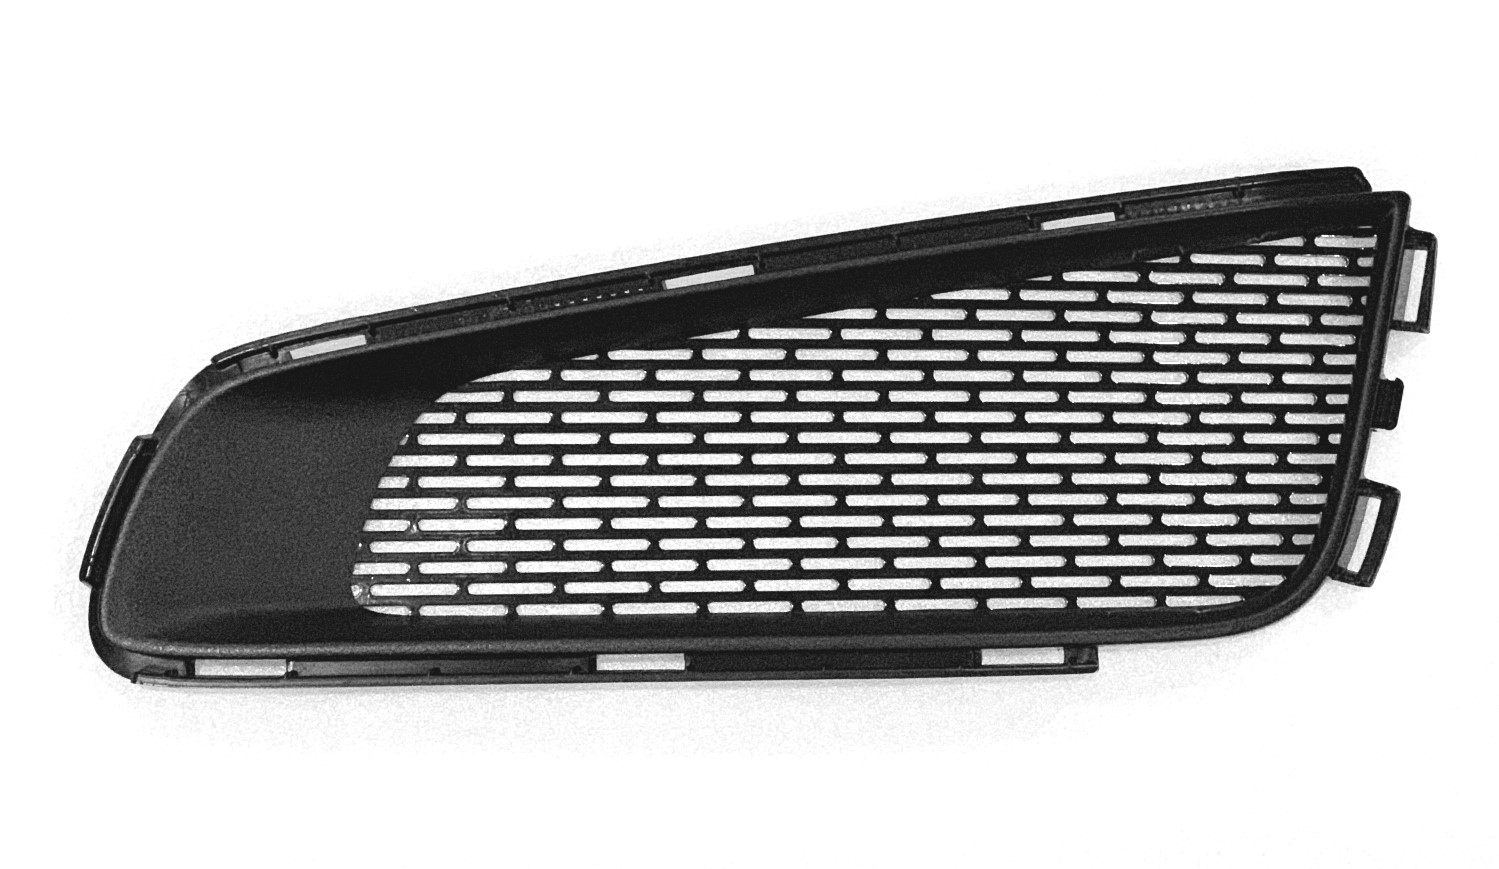 Fresh Look for Your Cadillac: New Black Mesh Grille for ATS Fog Light Area